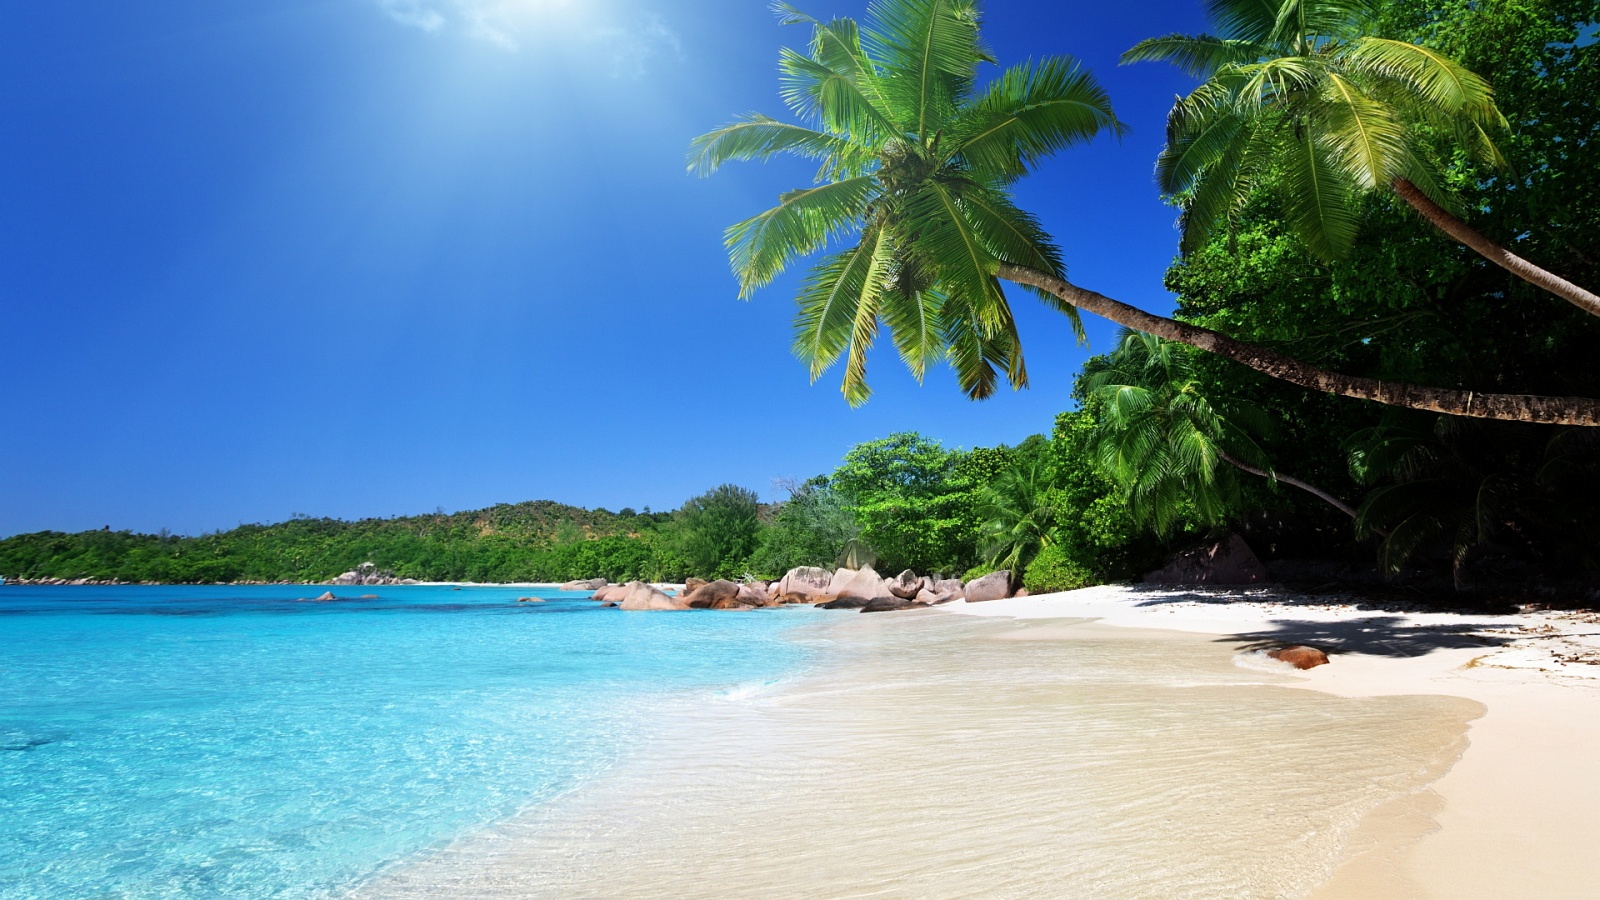 Download These 42 High Res Caribbean Wallpaper Backgrounds Here ...